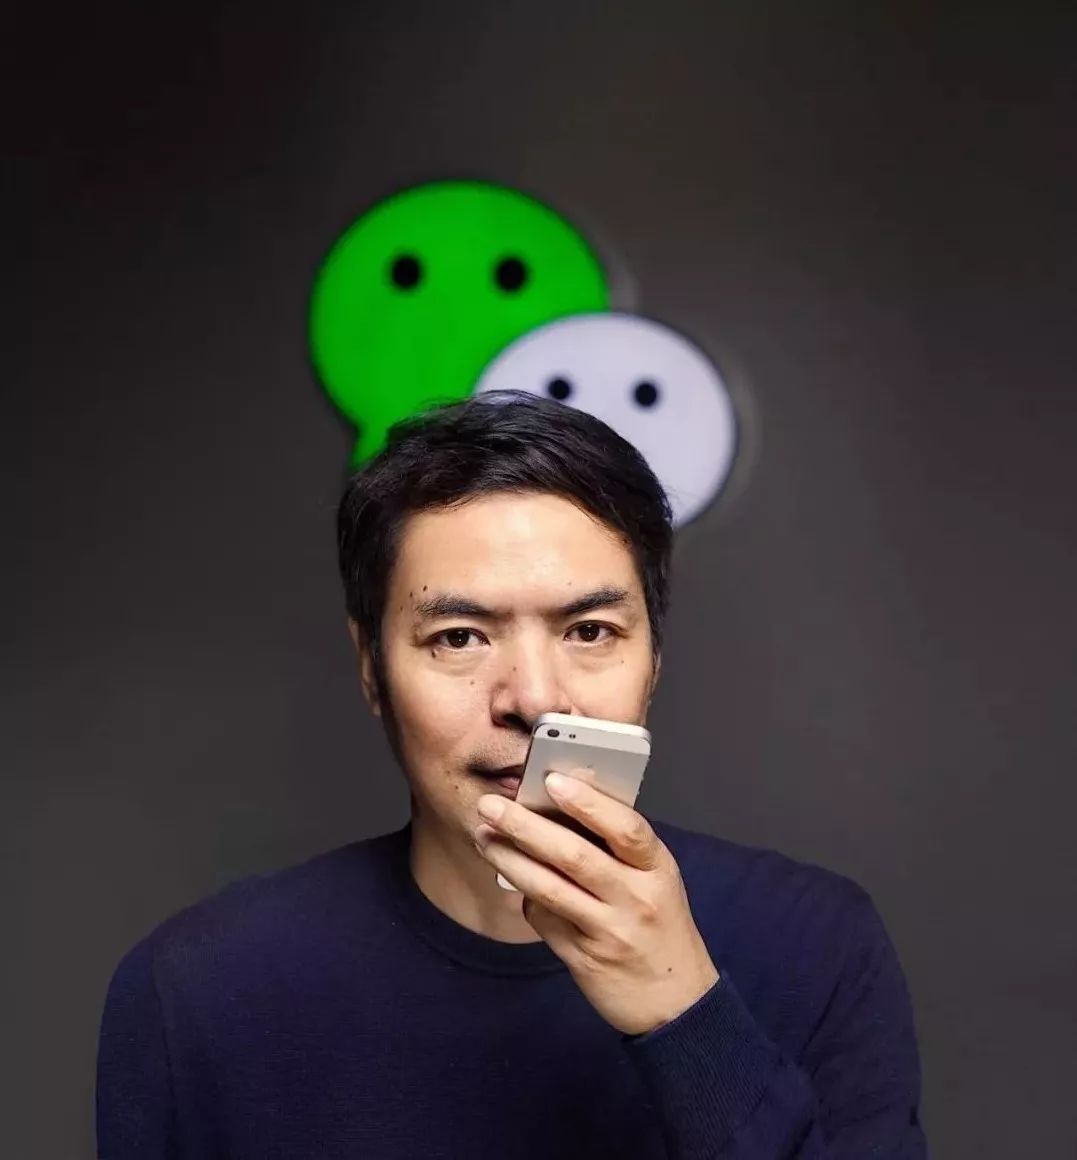 WeChat does not have Mr. Zhang